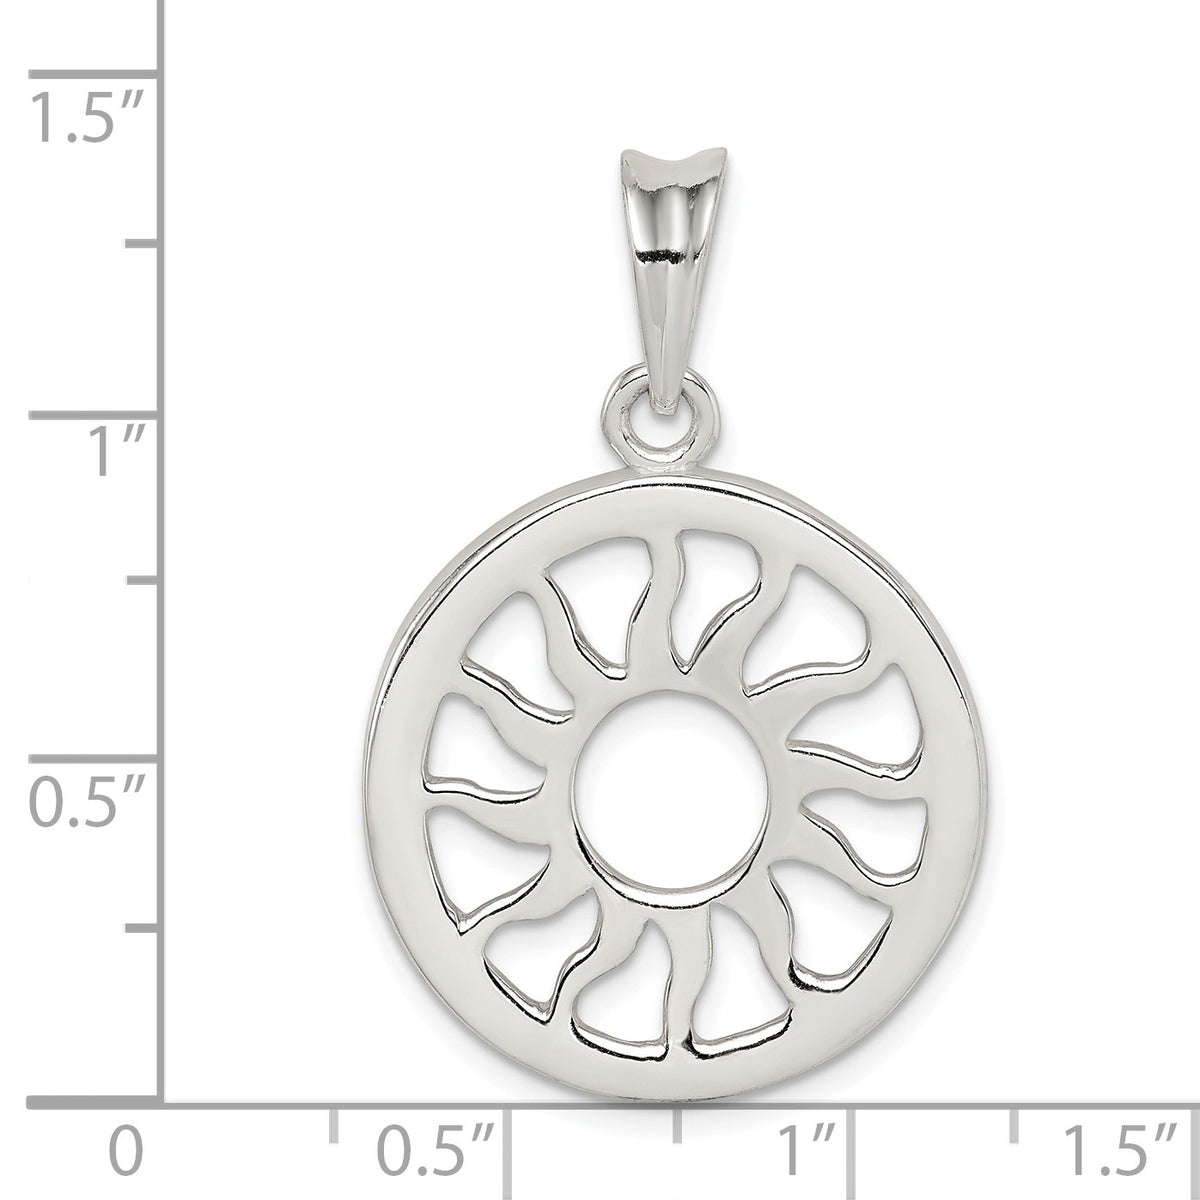 Alternate view of the Sterling Silver 24mm Polished Sun Pendant by The Black Bow Jewelry Co.